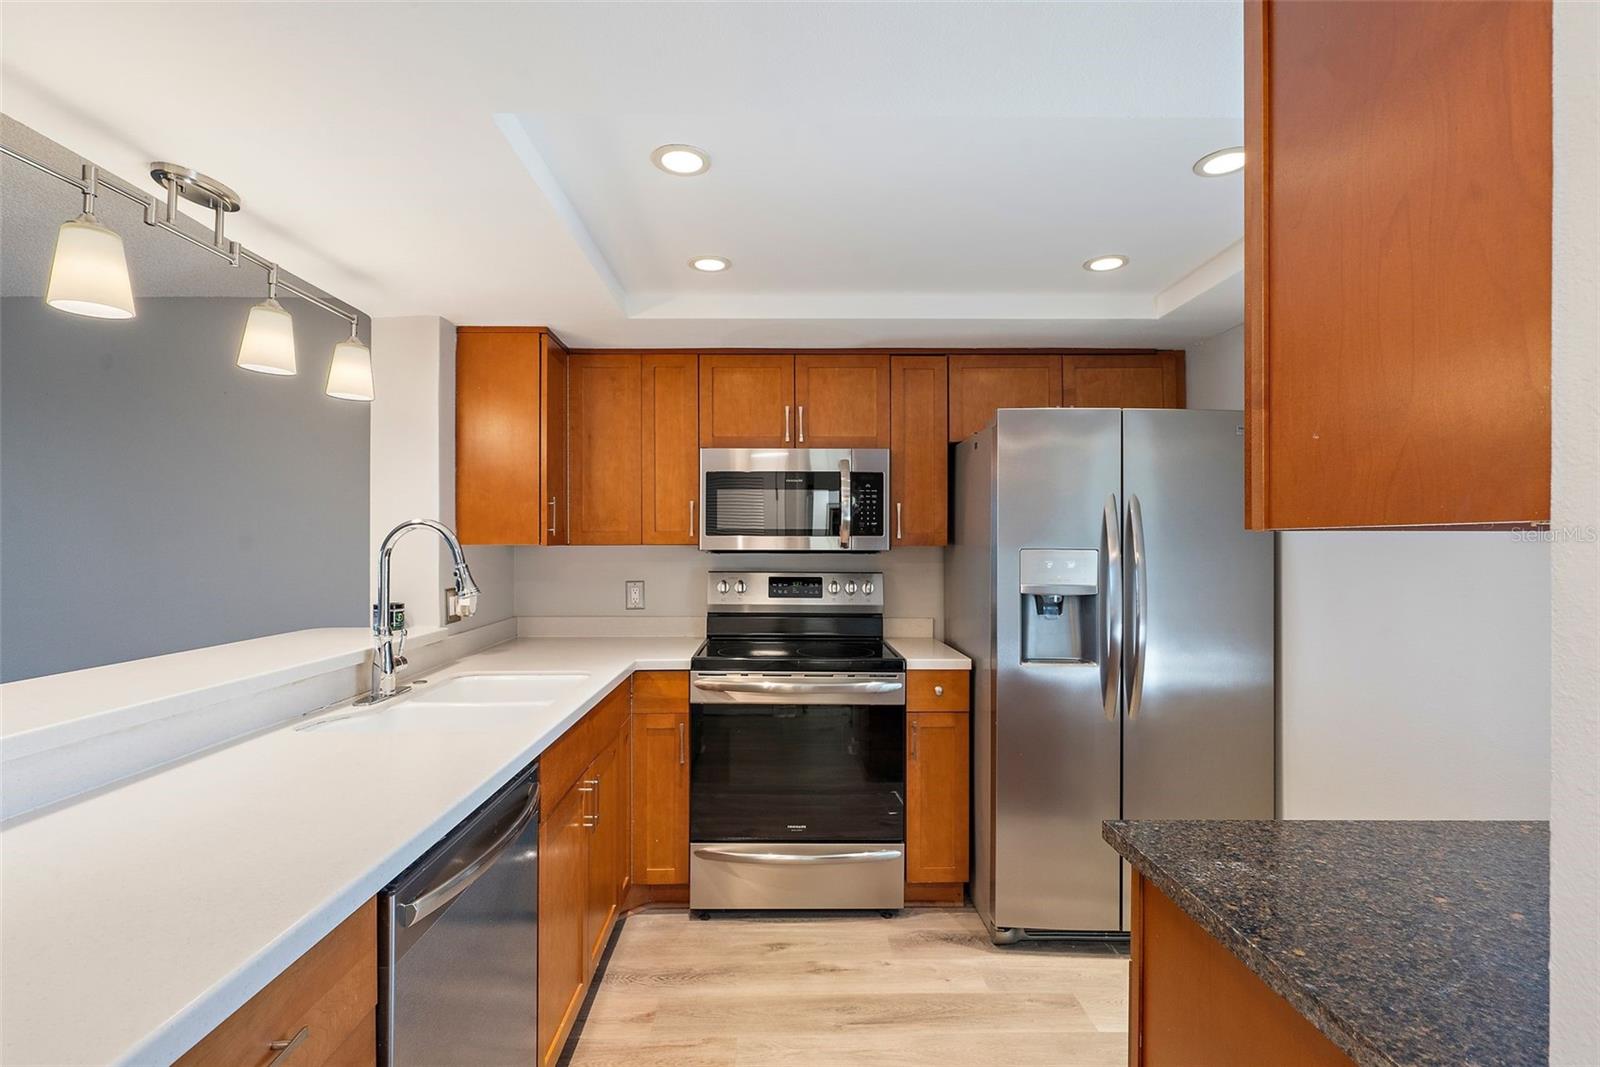 Wood cabinetry, Corian counter tops, porcelain sink, new lighting fixtures and stainless-steel appliances.